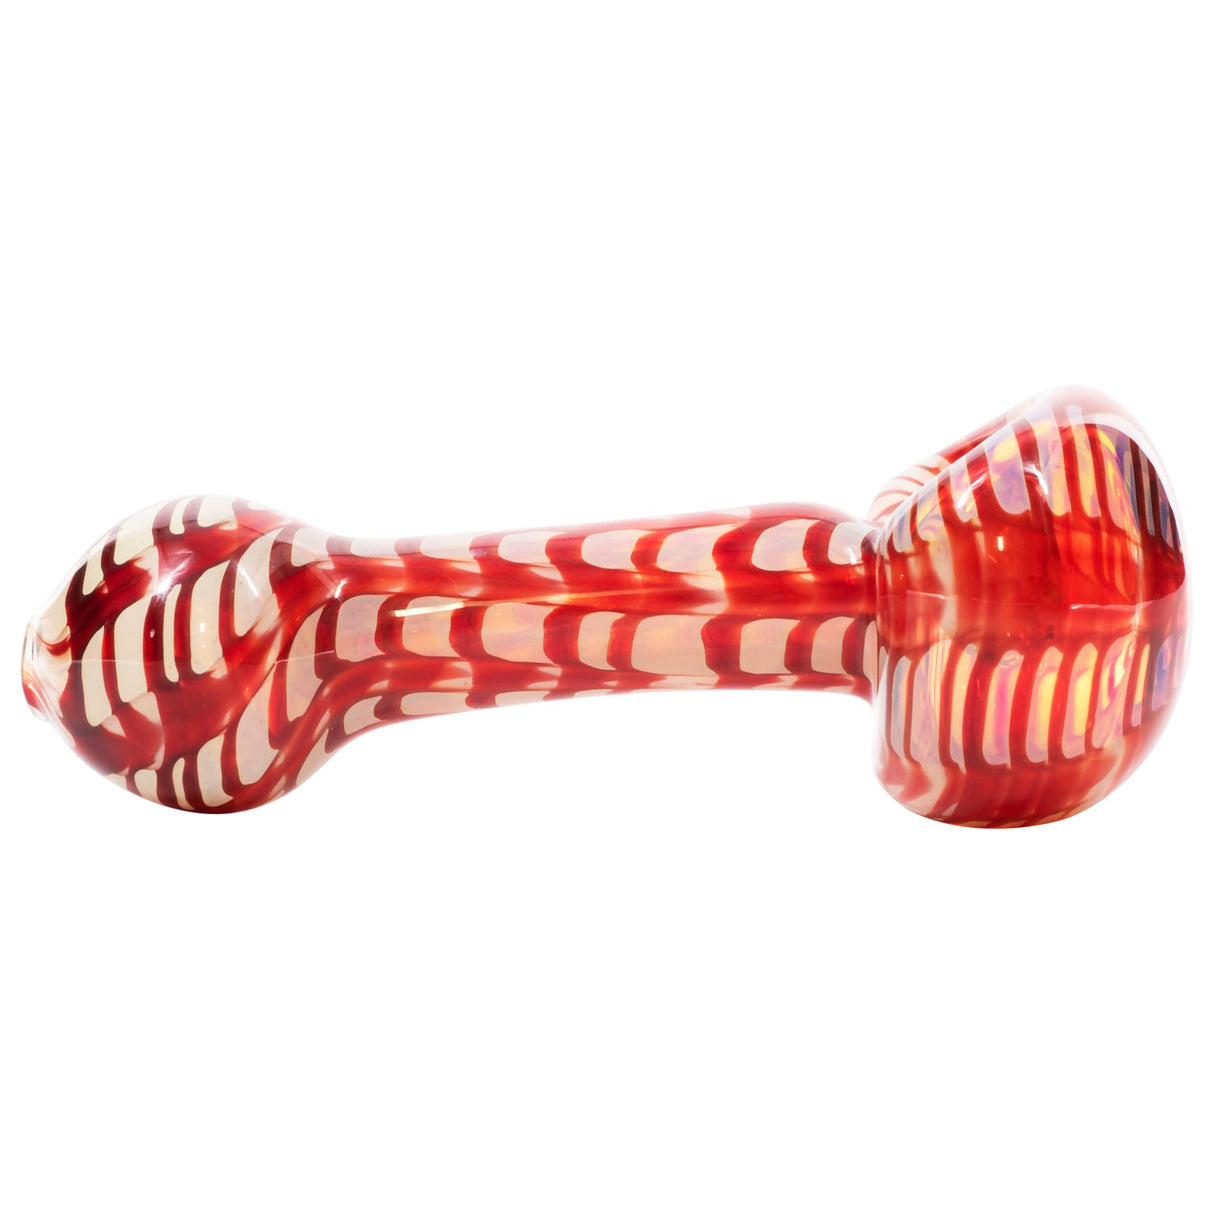 LA Pipes "Raker" Glass Spoon Pipe with Fumed Color Changing Design, Side View